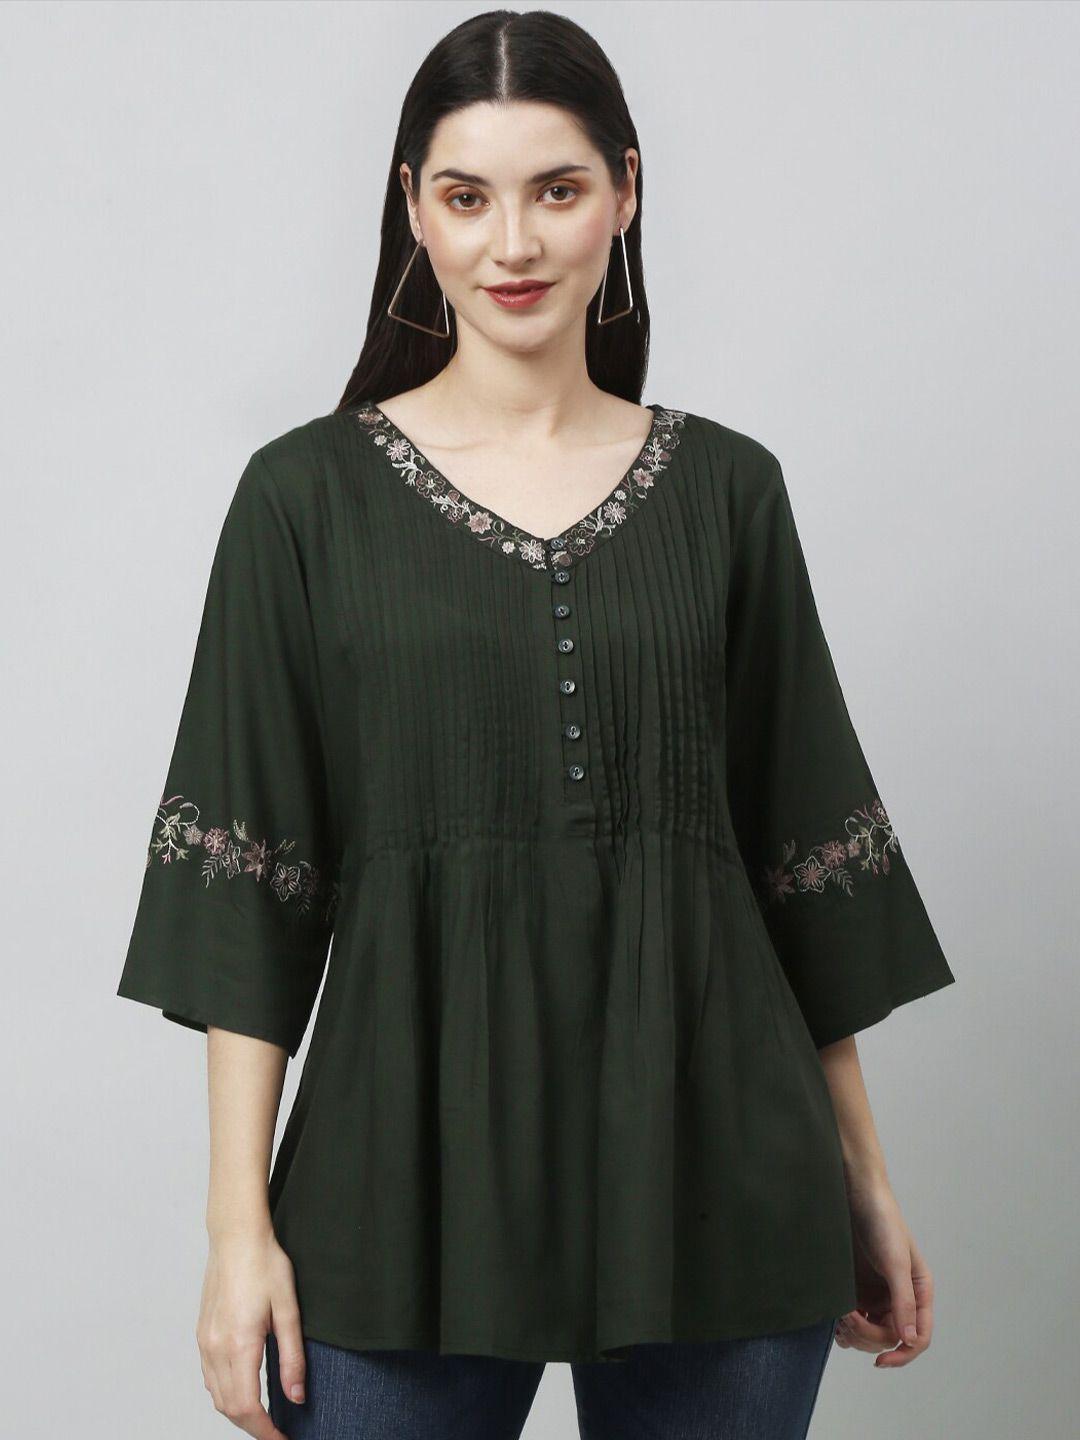 gracit floral embroidery v neck three-quarter flared sleeves top